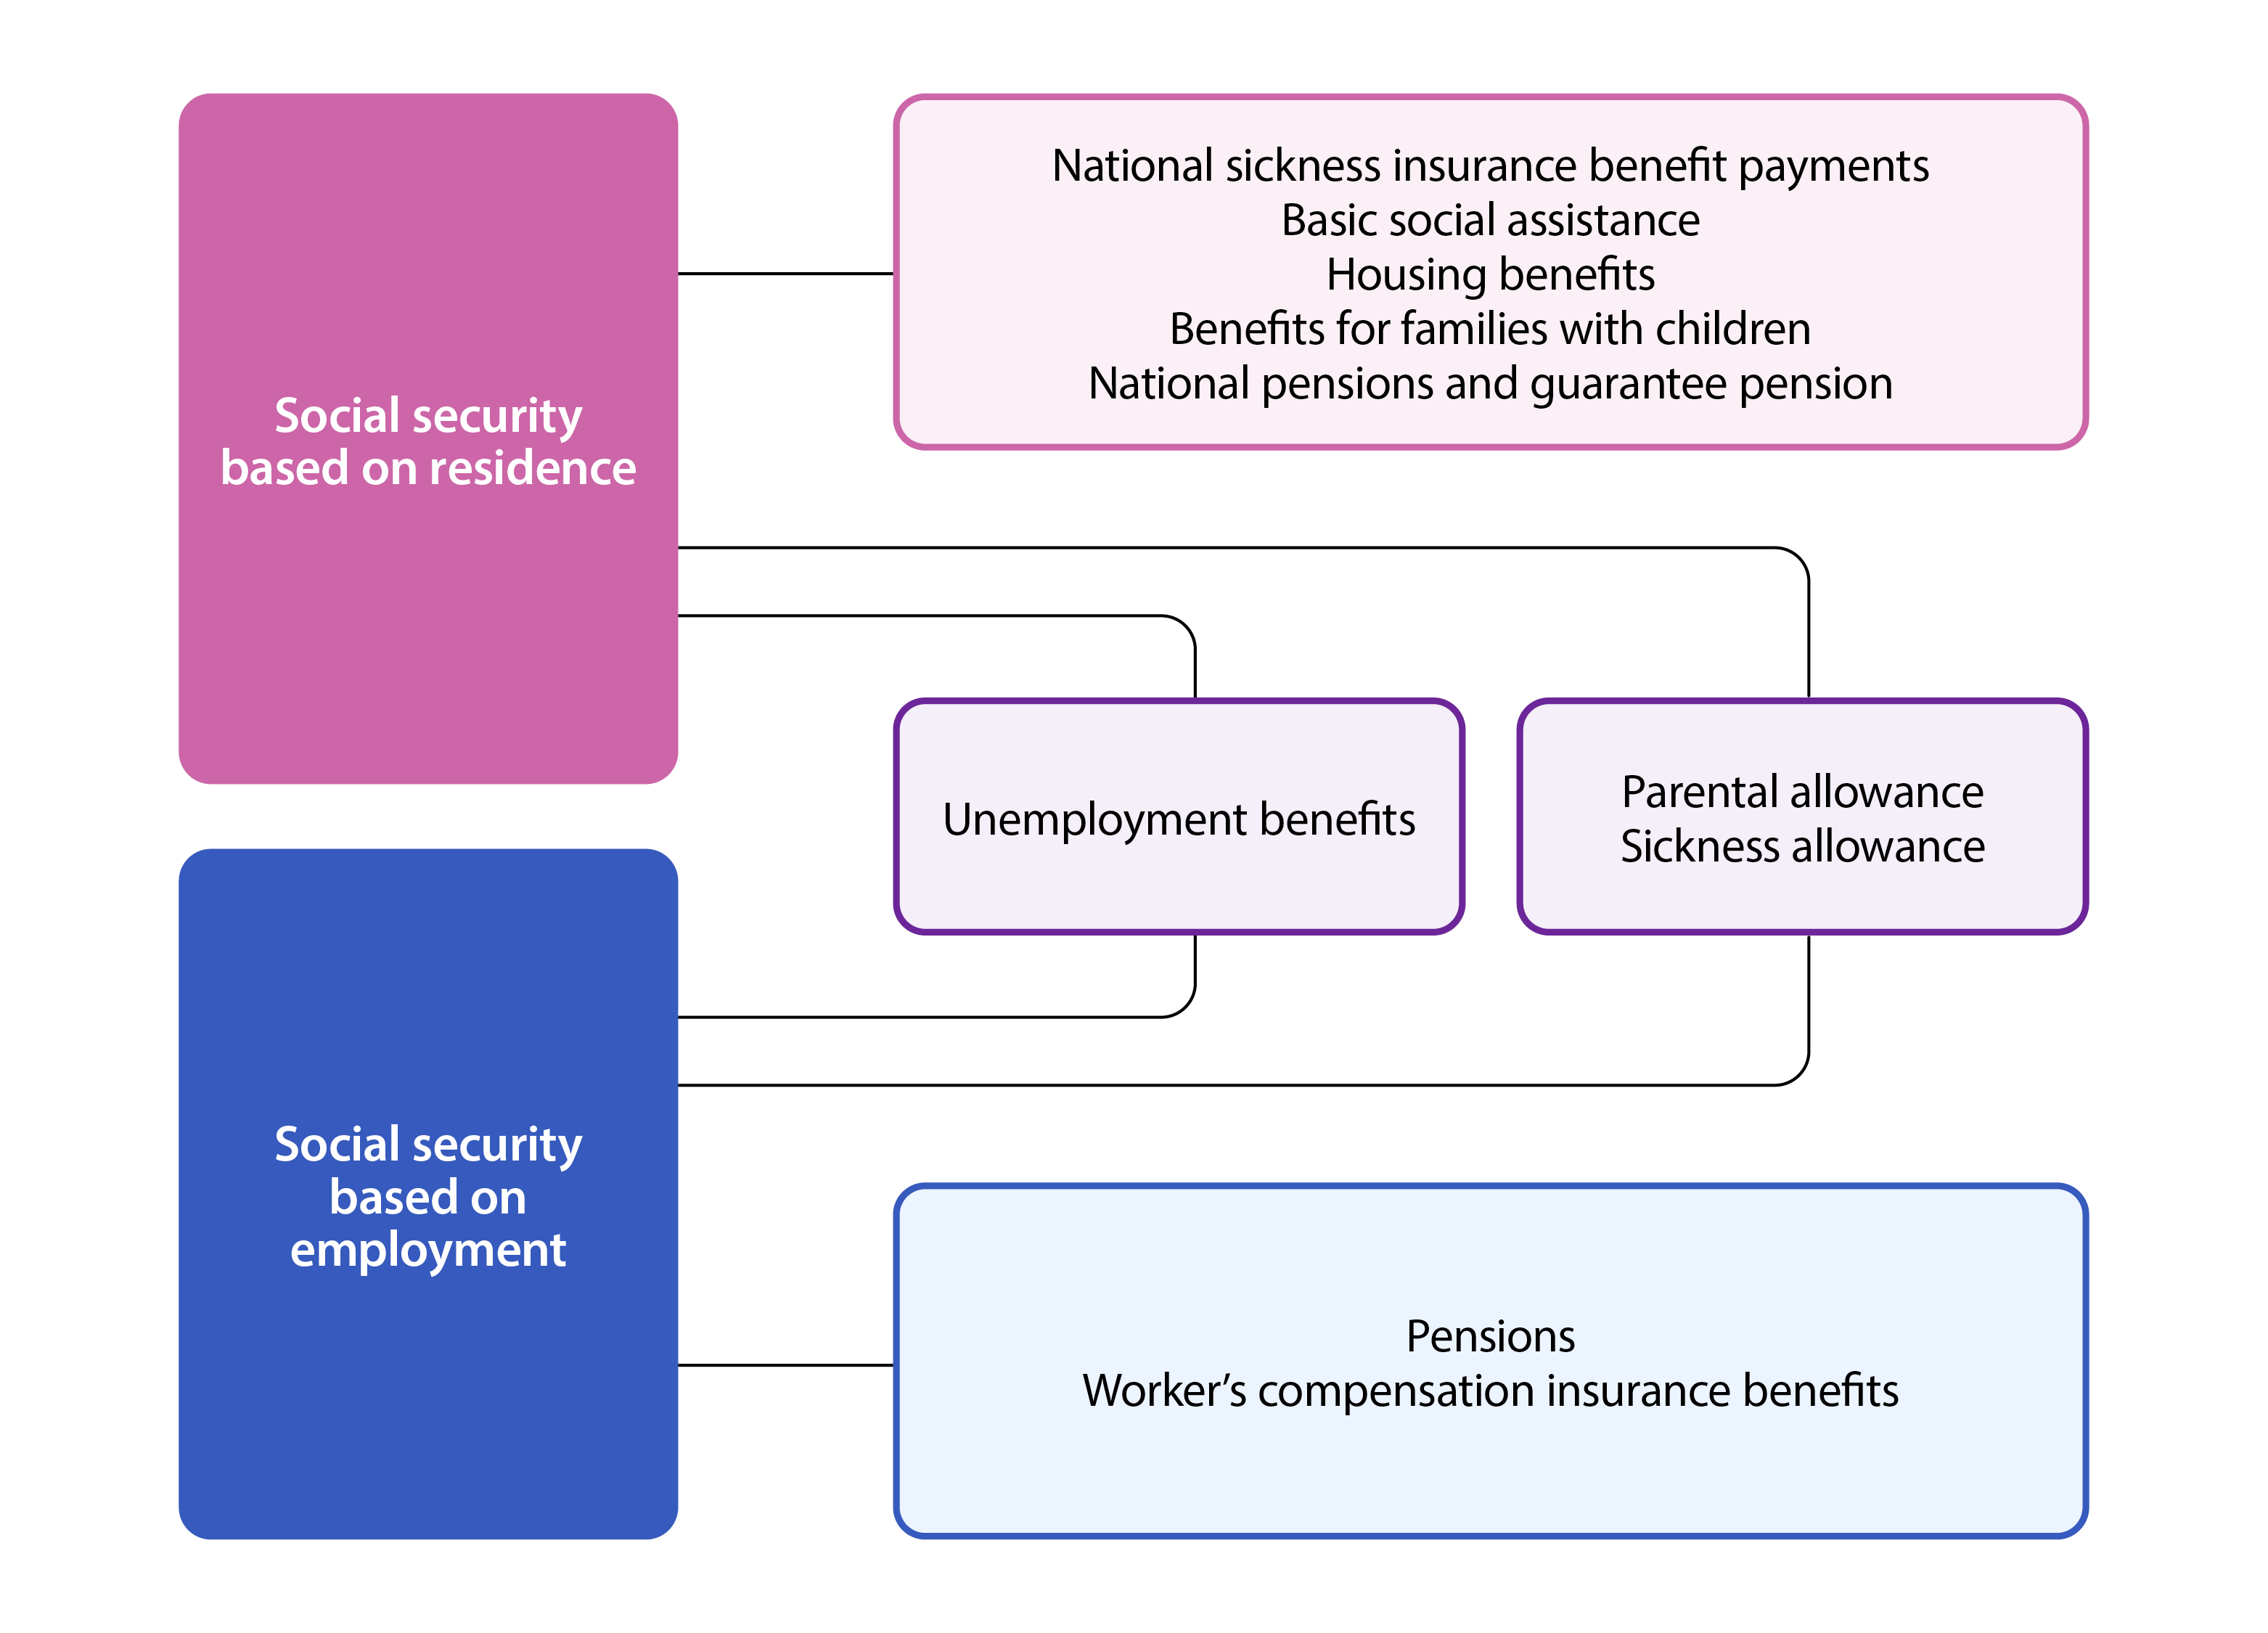 Graph about social security based on residence and employment.